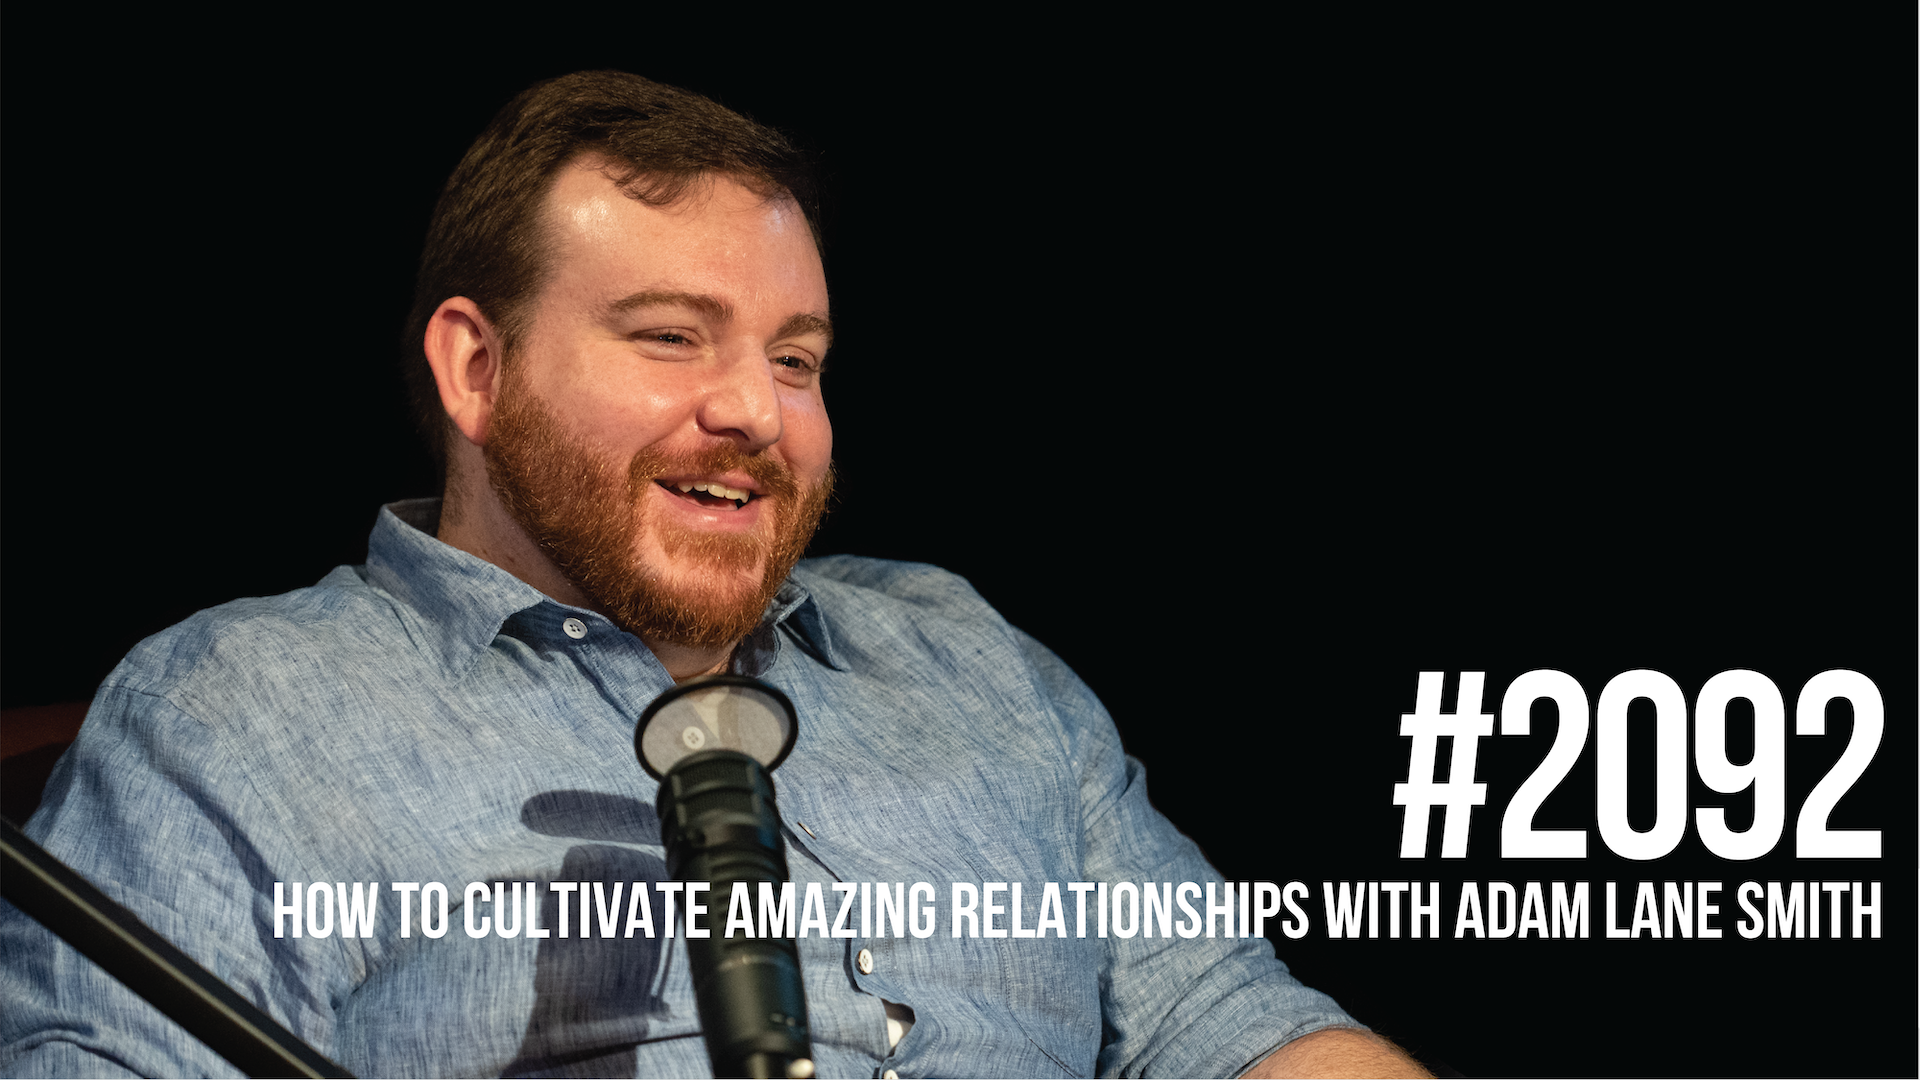 2092: How to Cultivate Amazing Relationships With Adam Lane Smith